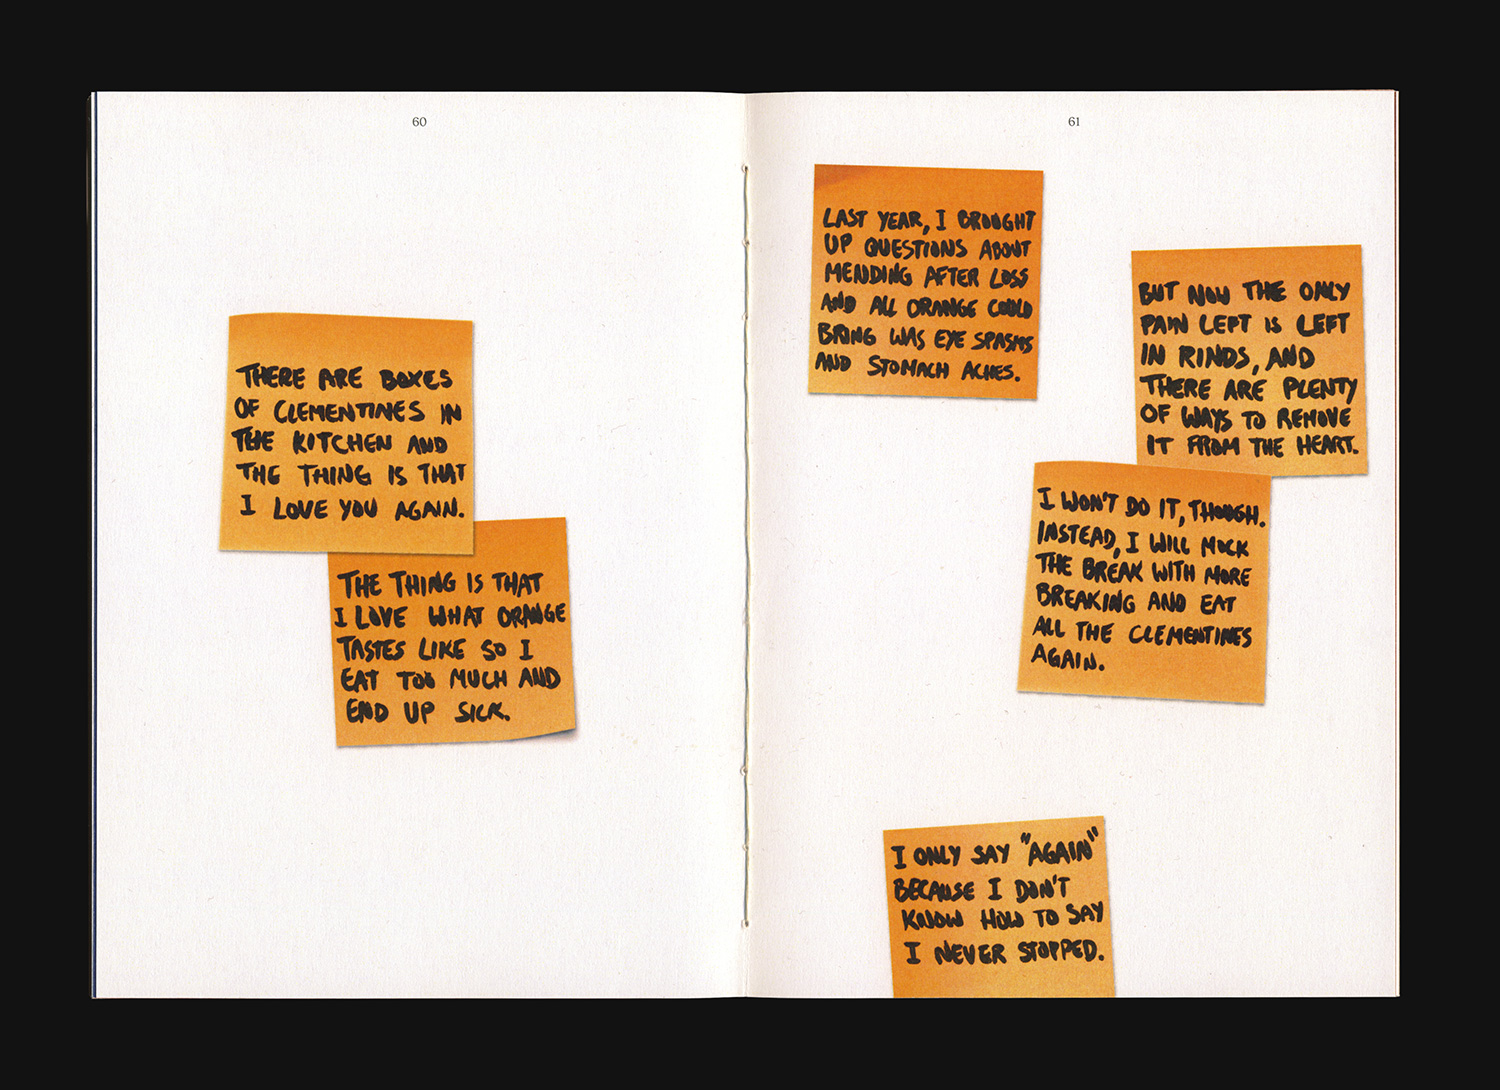 Book spread with text on sticky notes.